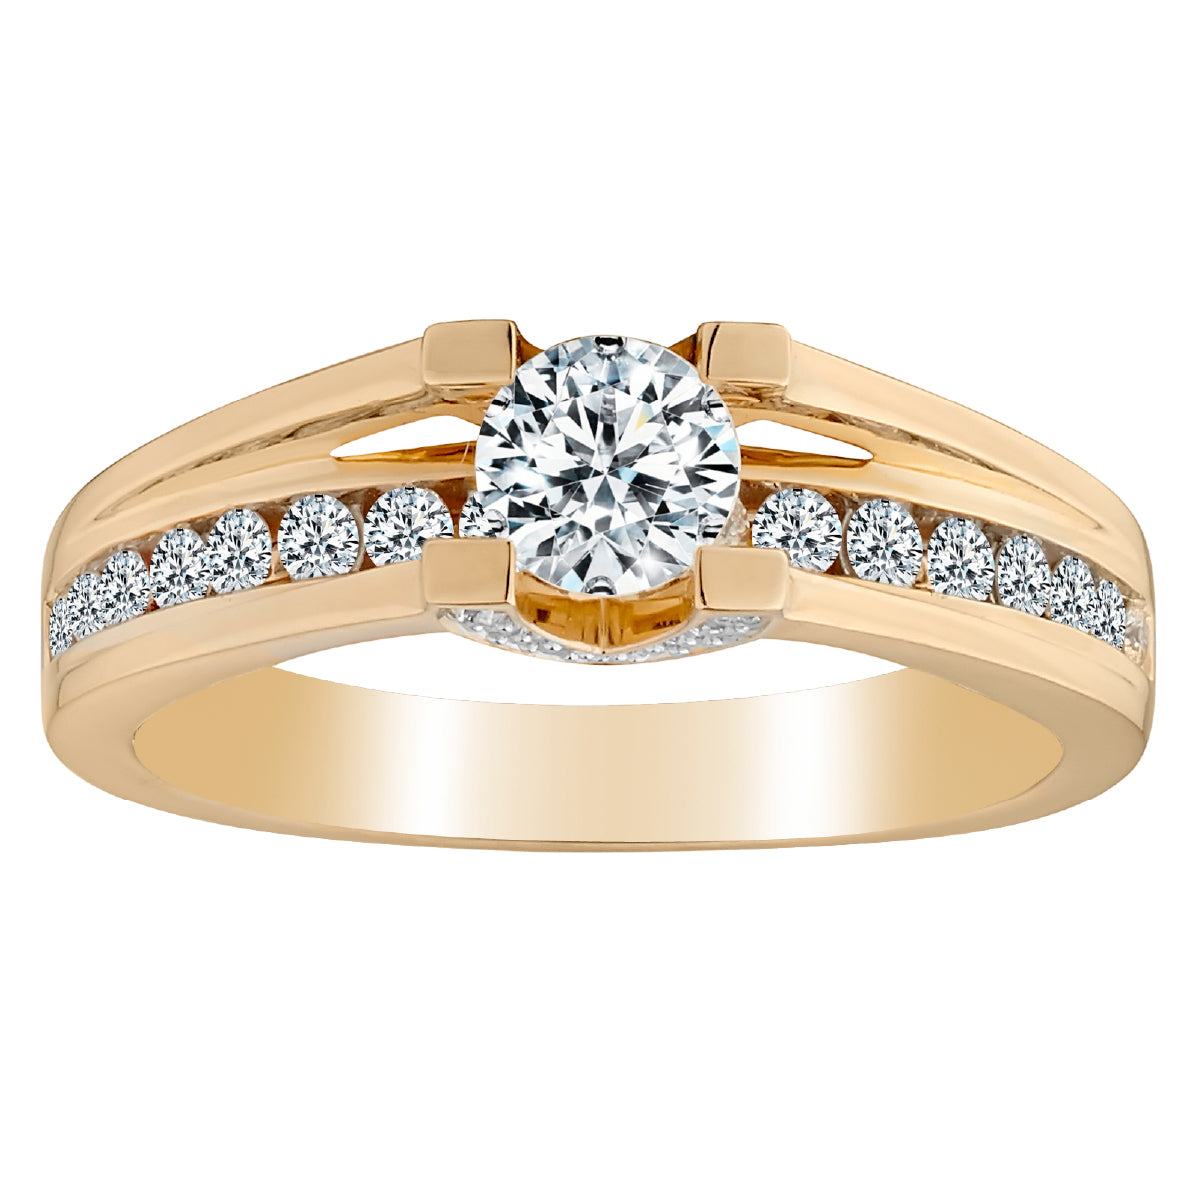 .88 Carat Total Diamond Weight,  .50 Carat Round Brilliant Cut Centre Diamond,  Euro Shank Engagement Ring,  14kt Yellow Gold. Griffin Jewellery Designs